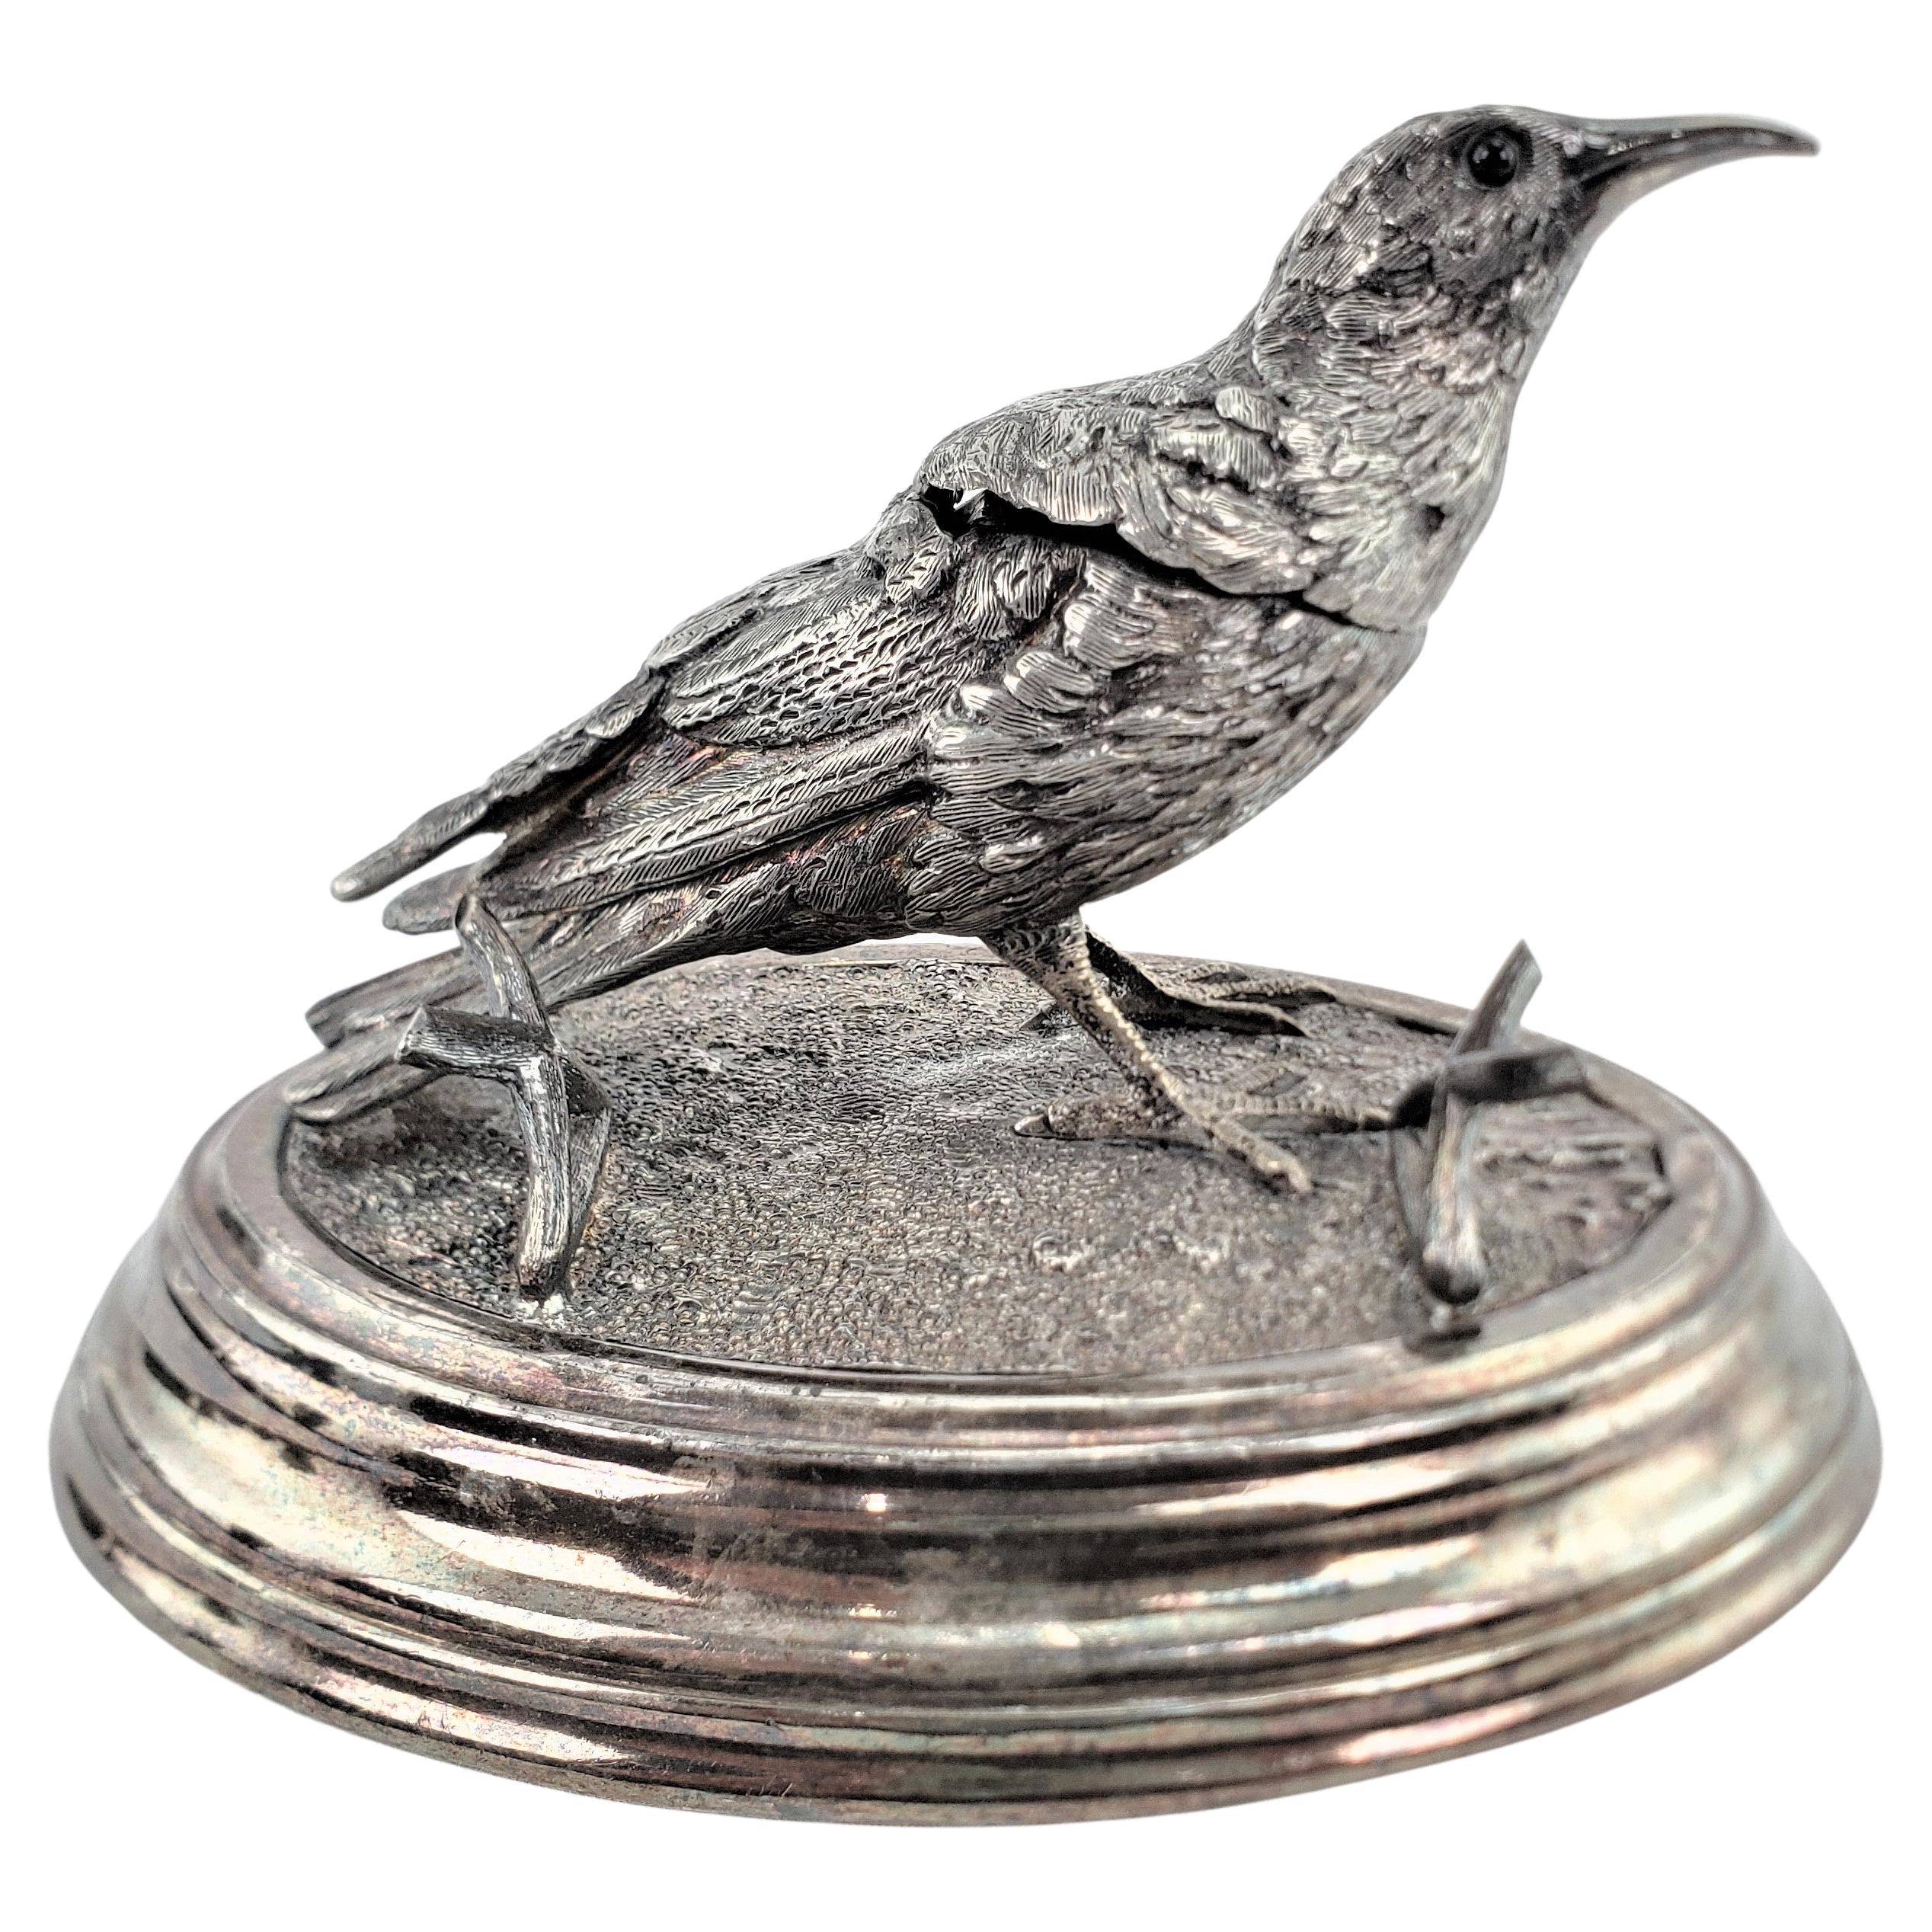 Antique Ornately Cast & Silver Plated Figural Bird Inkwell & Pen Holder or Rest